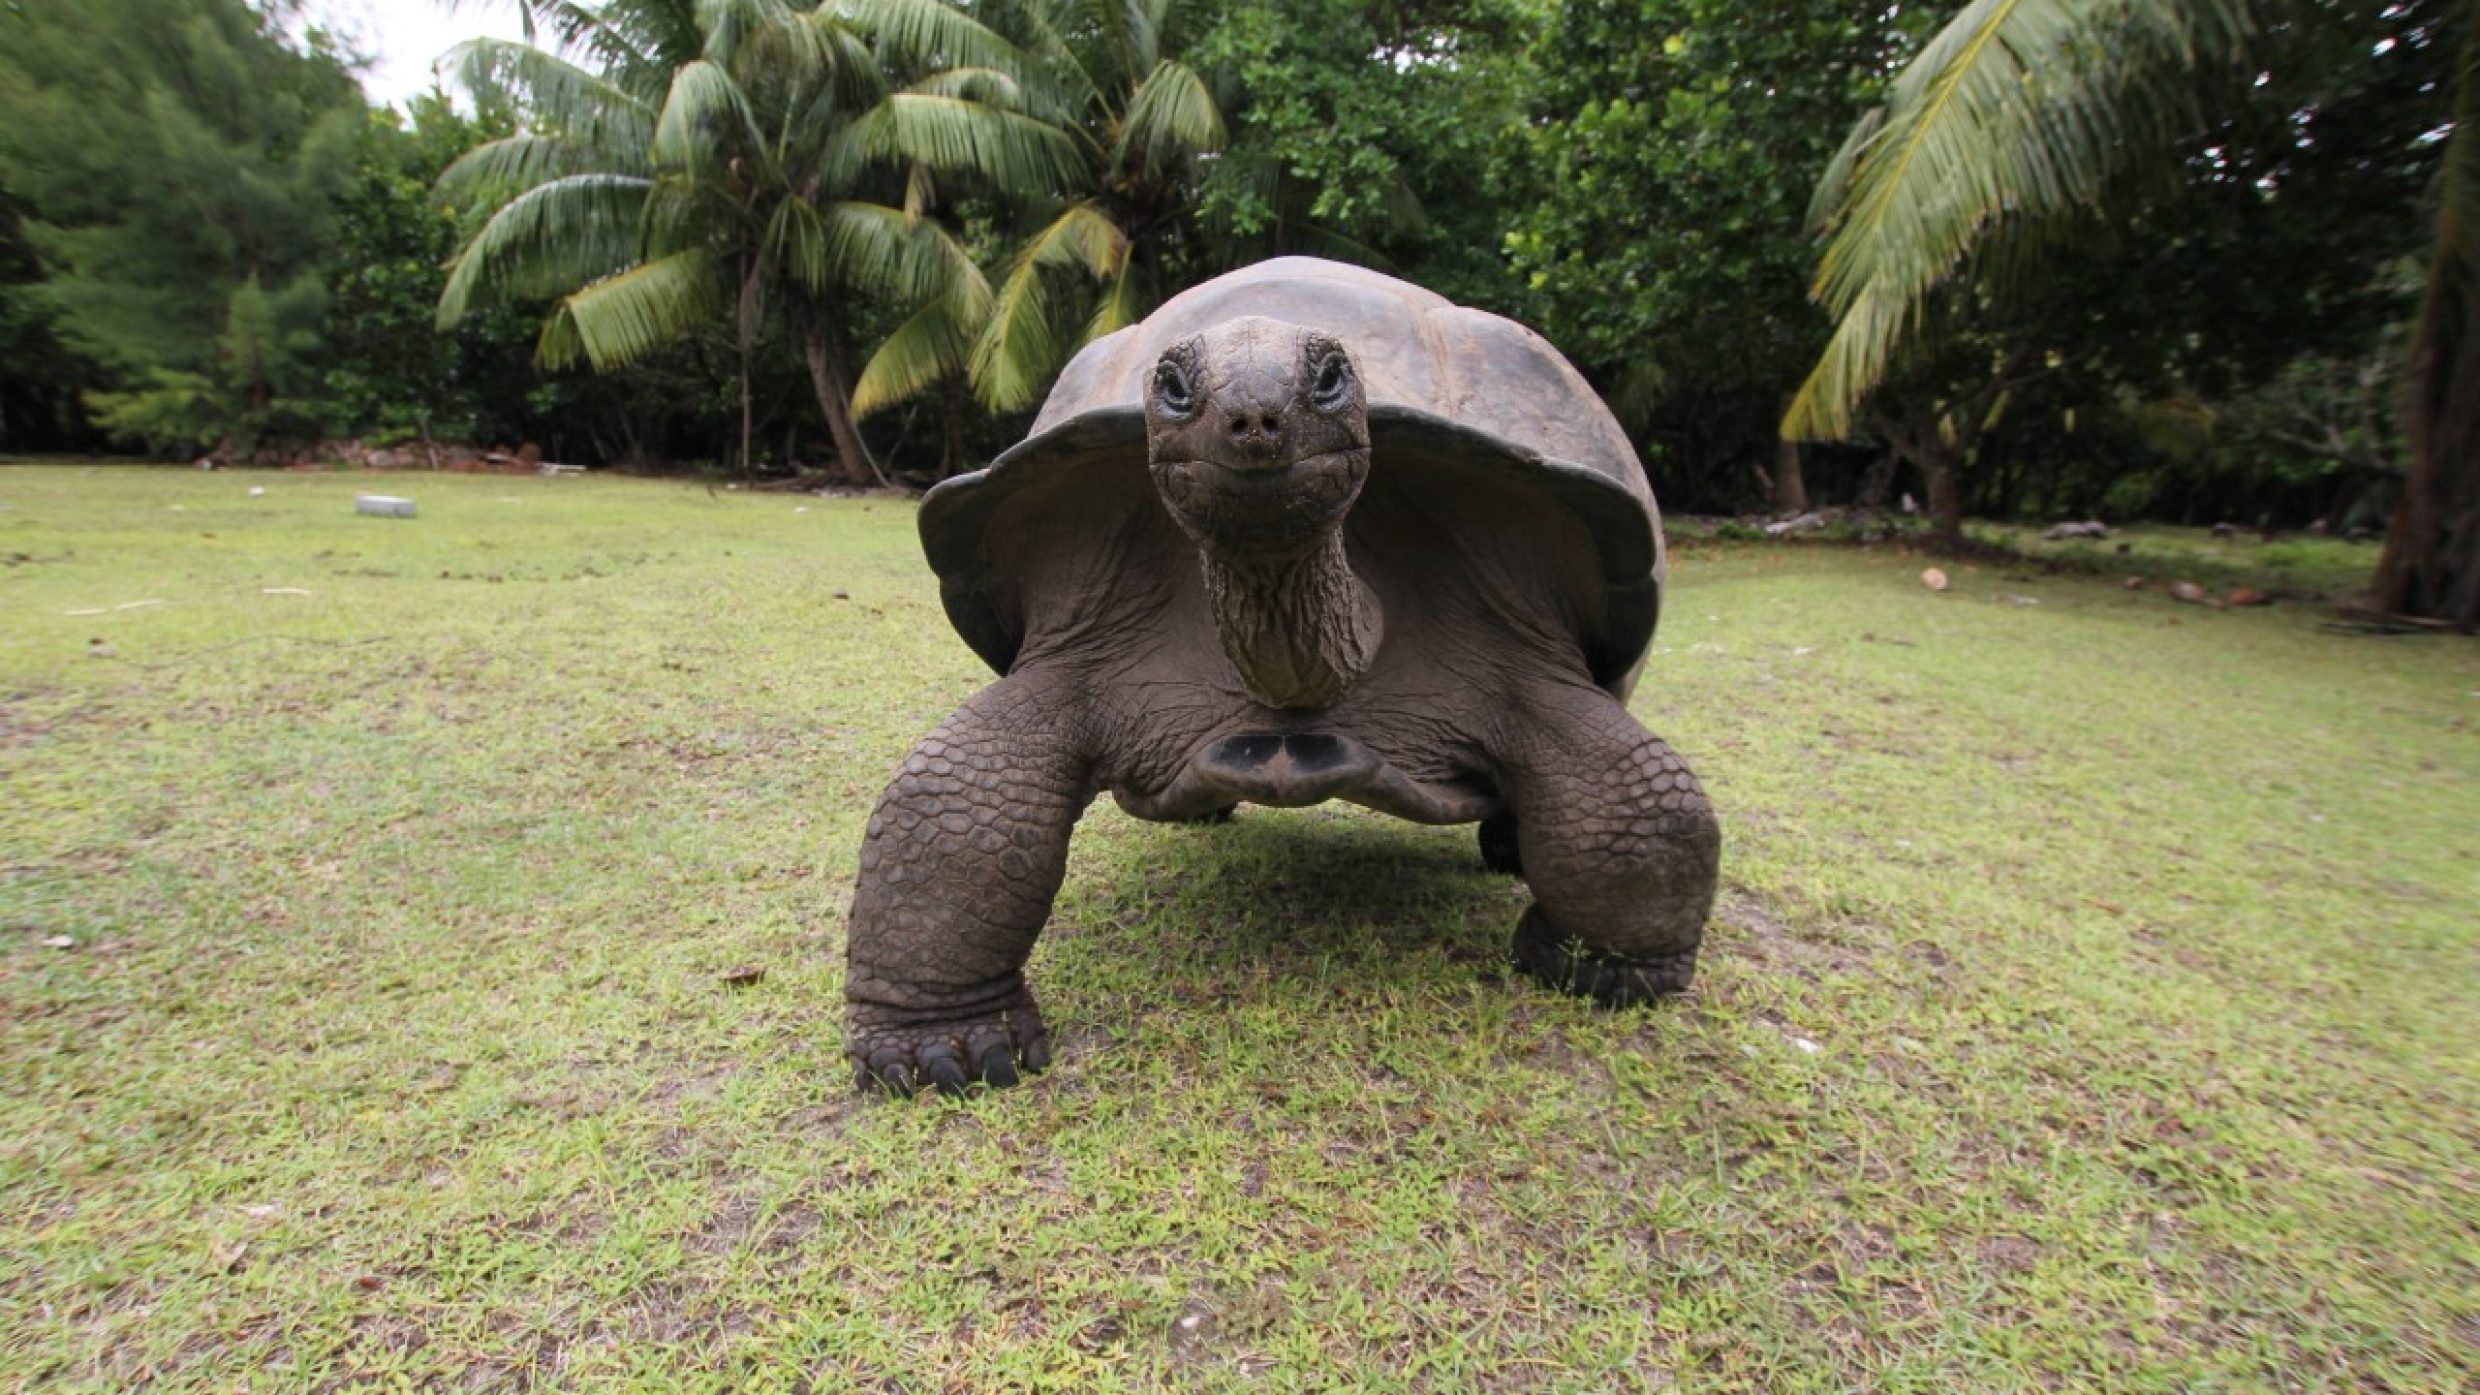  The oldest reptiles have hardly any natural predators due to their sturdy shell and they are very adaptable, even surviving the ice age. One Aldabra giant tortoise even lived to a ripe old 256. 